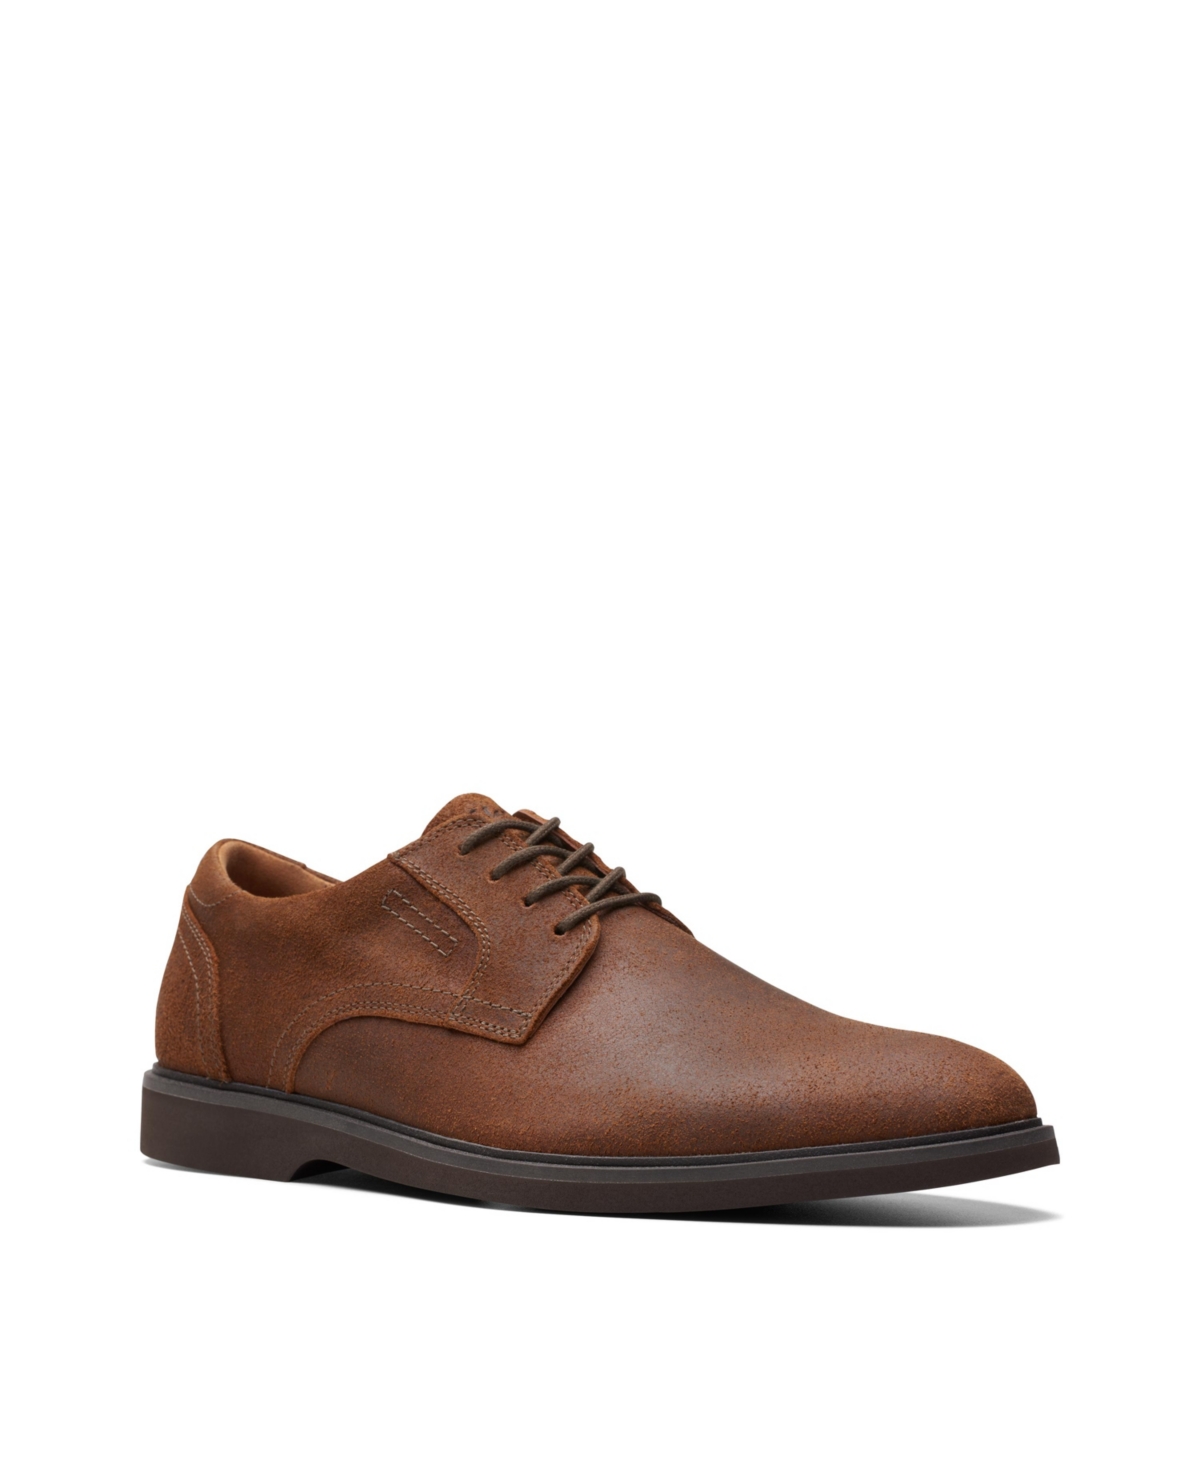 Clarks Men's Collection Malwood Leather Lace Up Shoes In Cola Suede